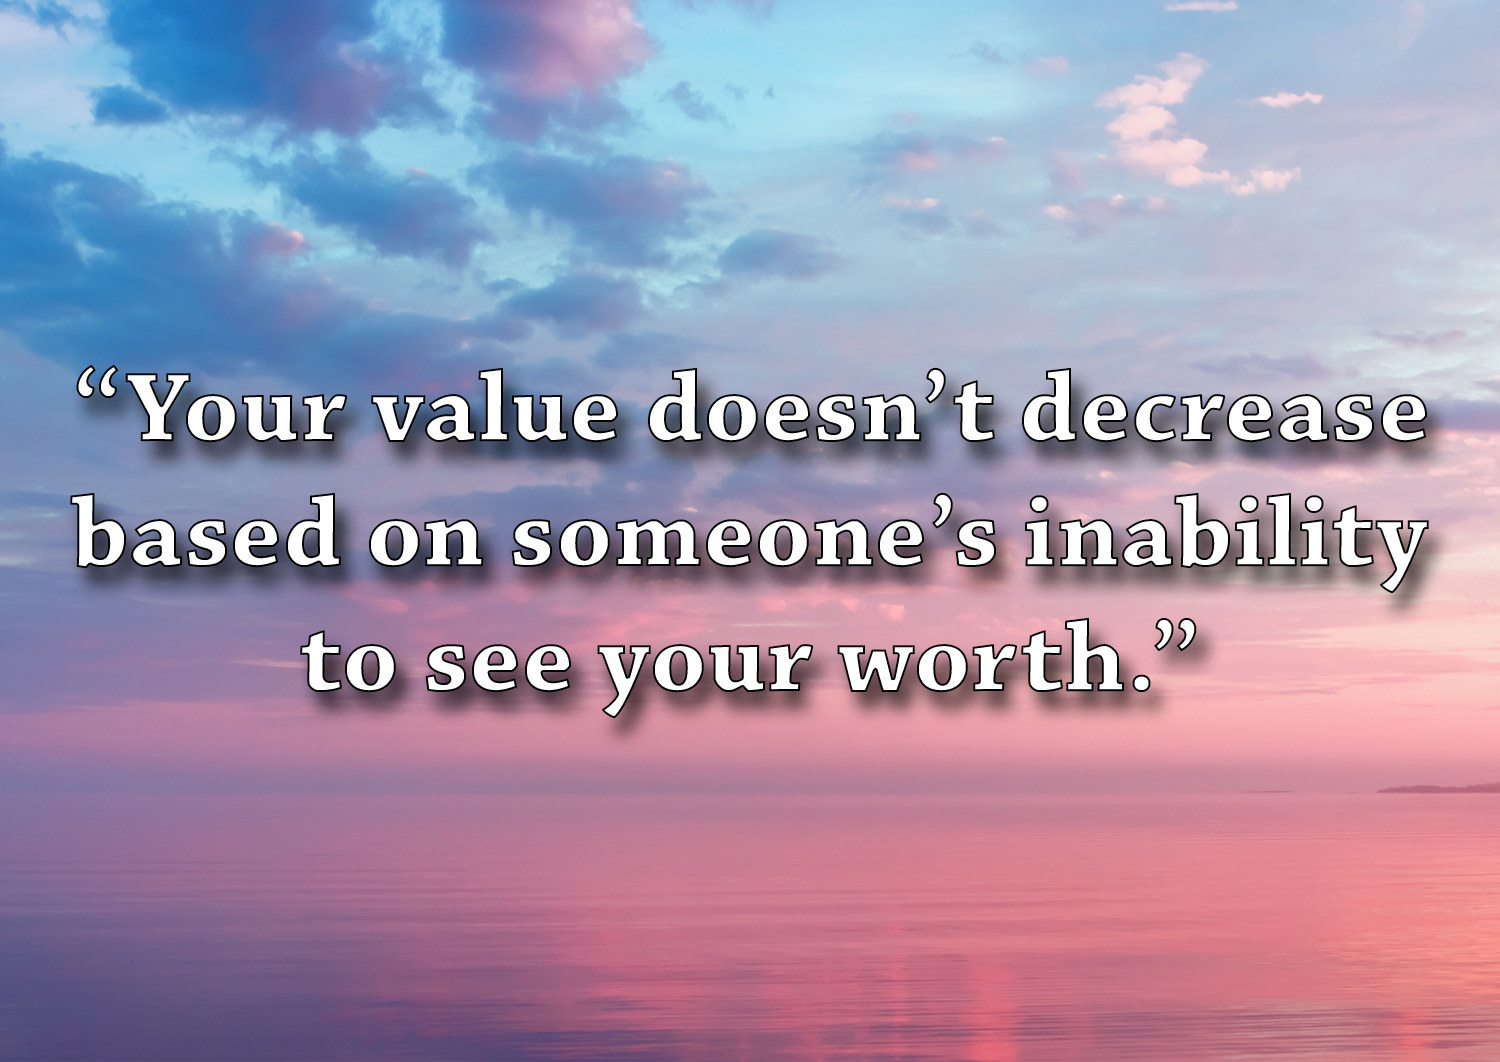 &quot;Your value doesn&#x27;t decrease based on someone&#x27;s inability to see your worth.&quot;